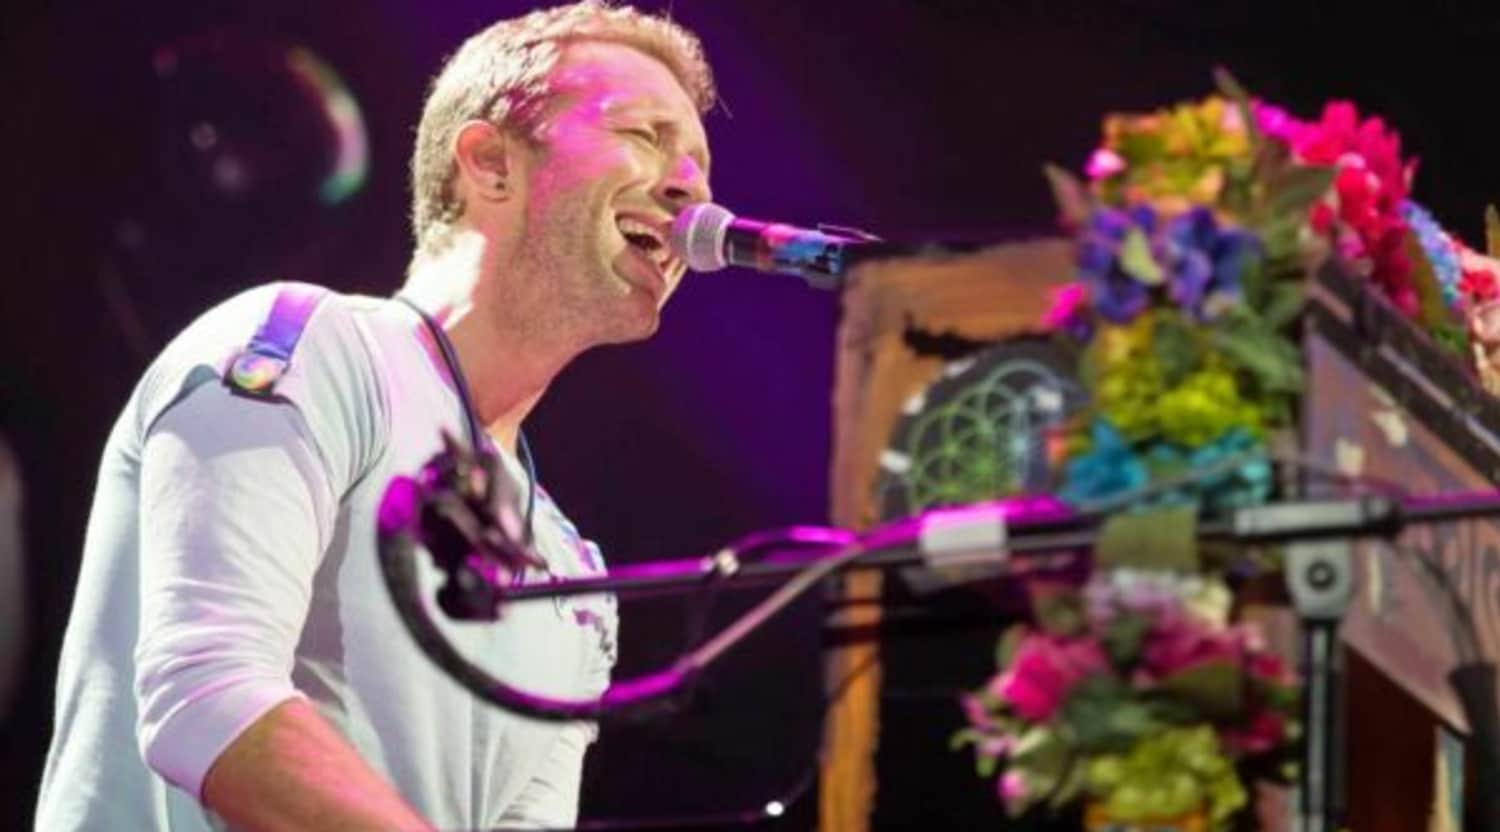 Coldplay Tickets - Coldplay Concert Tickets and Tour Dates - StubHub Canada1500 x 832